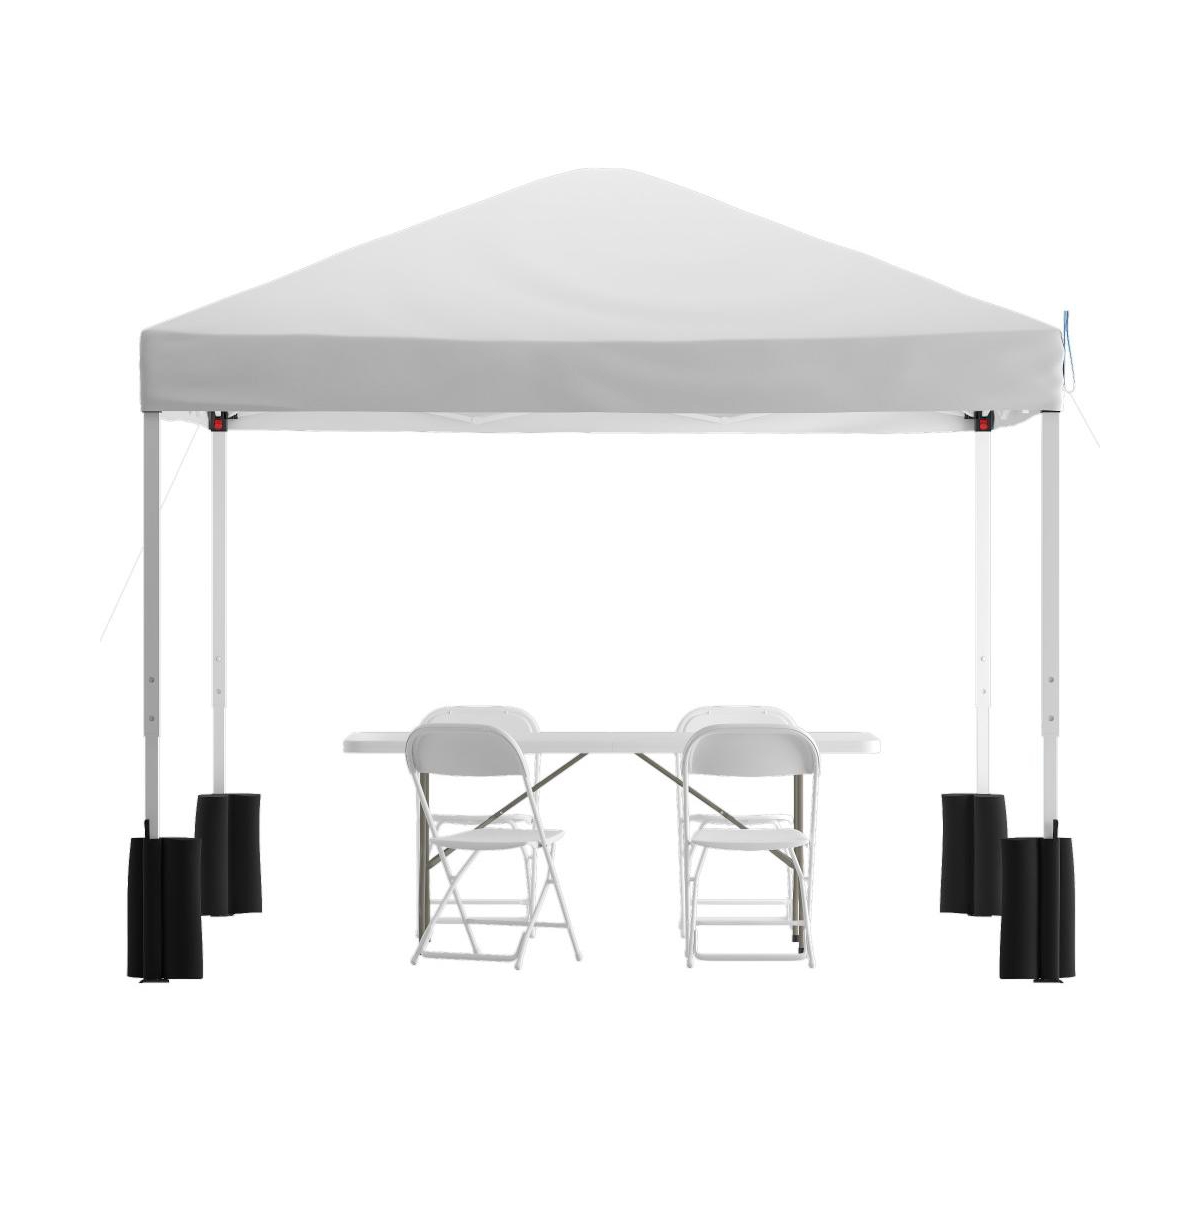 Outdoor Event/Tailgate Tent Set With Pop Up Event Canopy And Wheeled Case And Bi-Fold Table With Carrying Handle - White